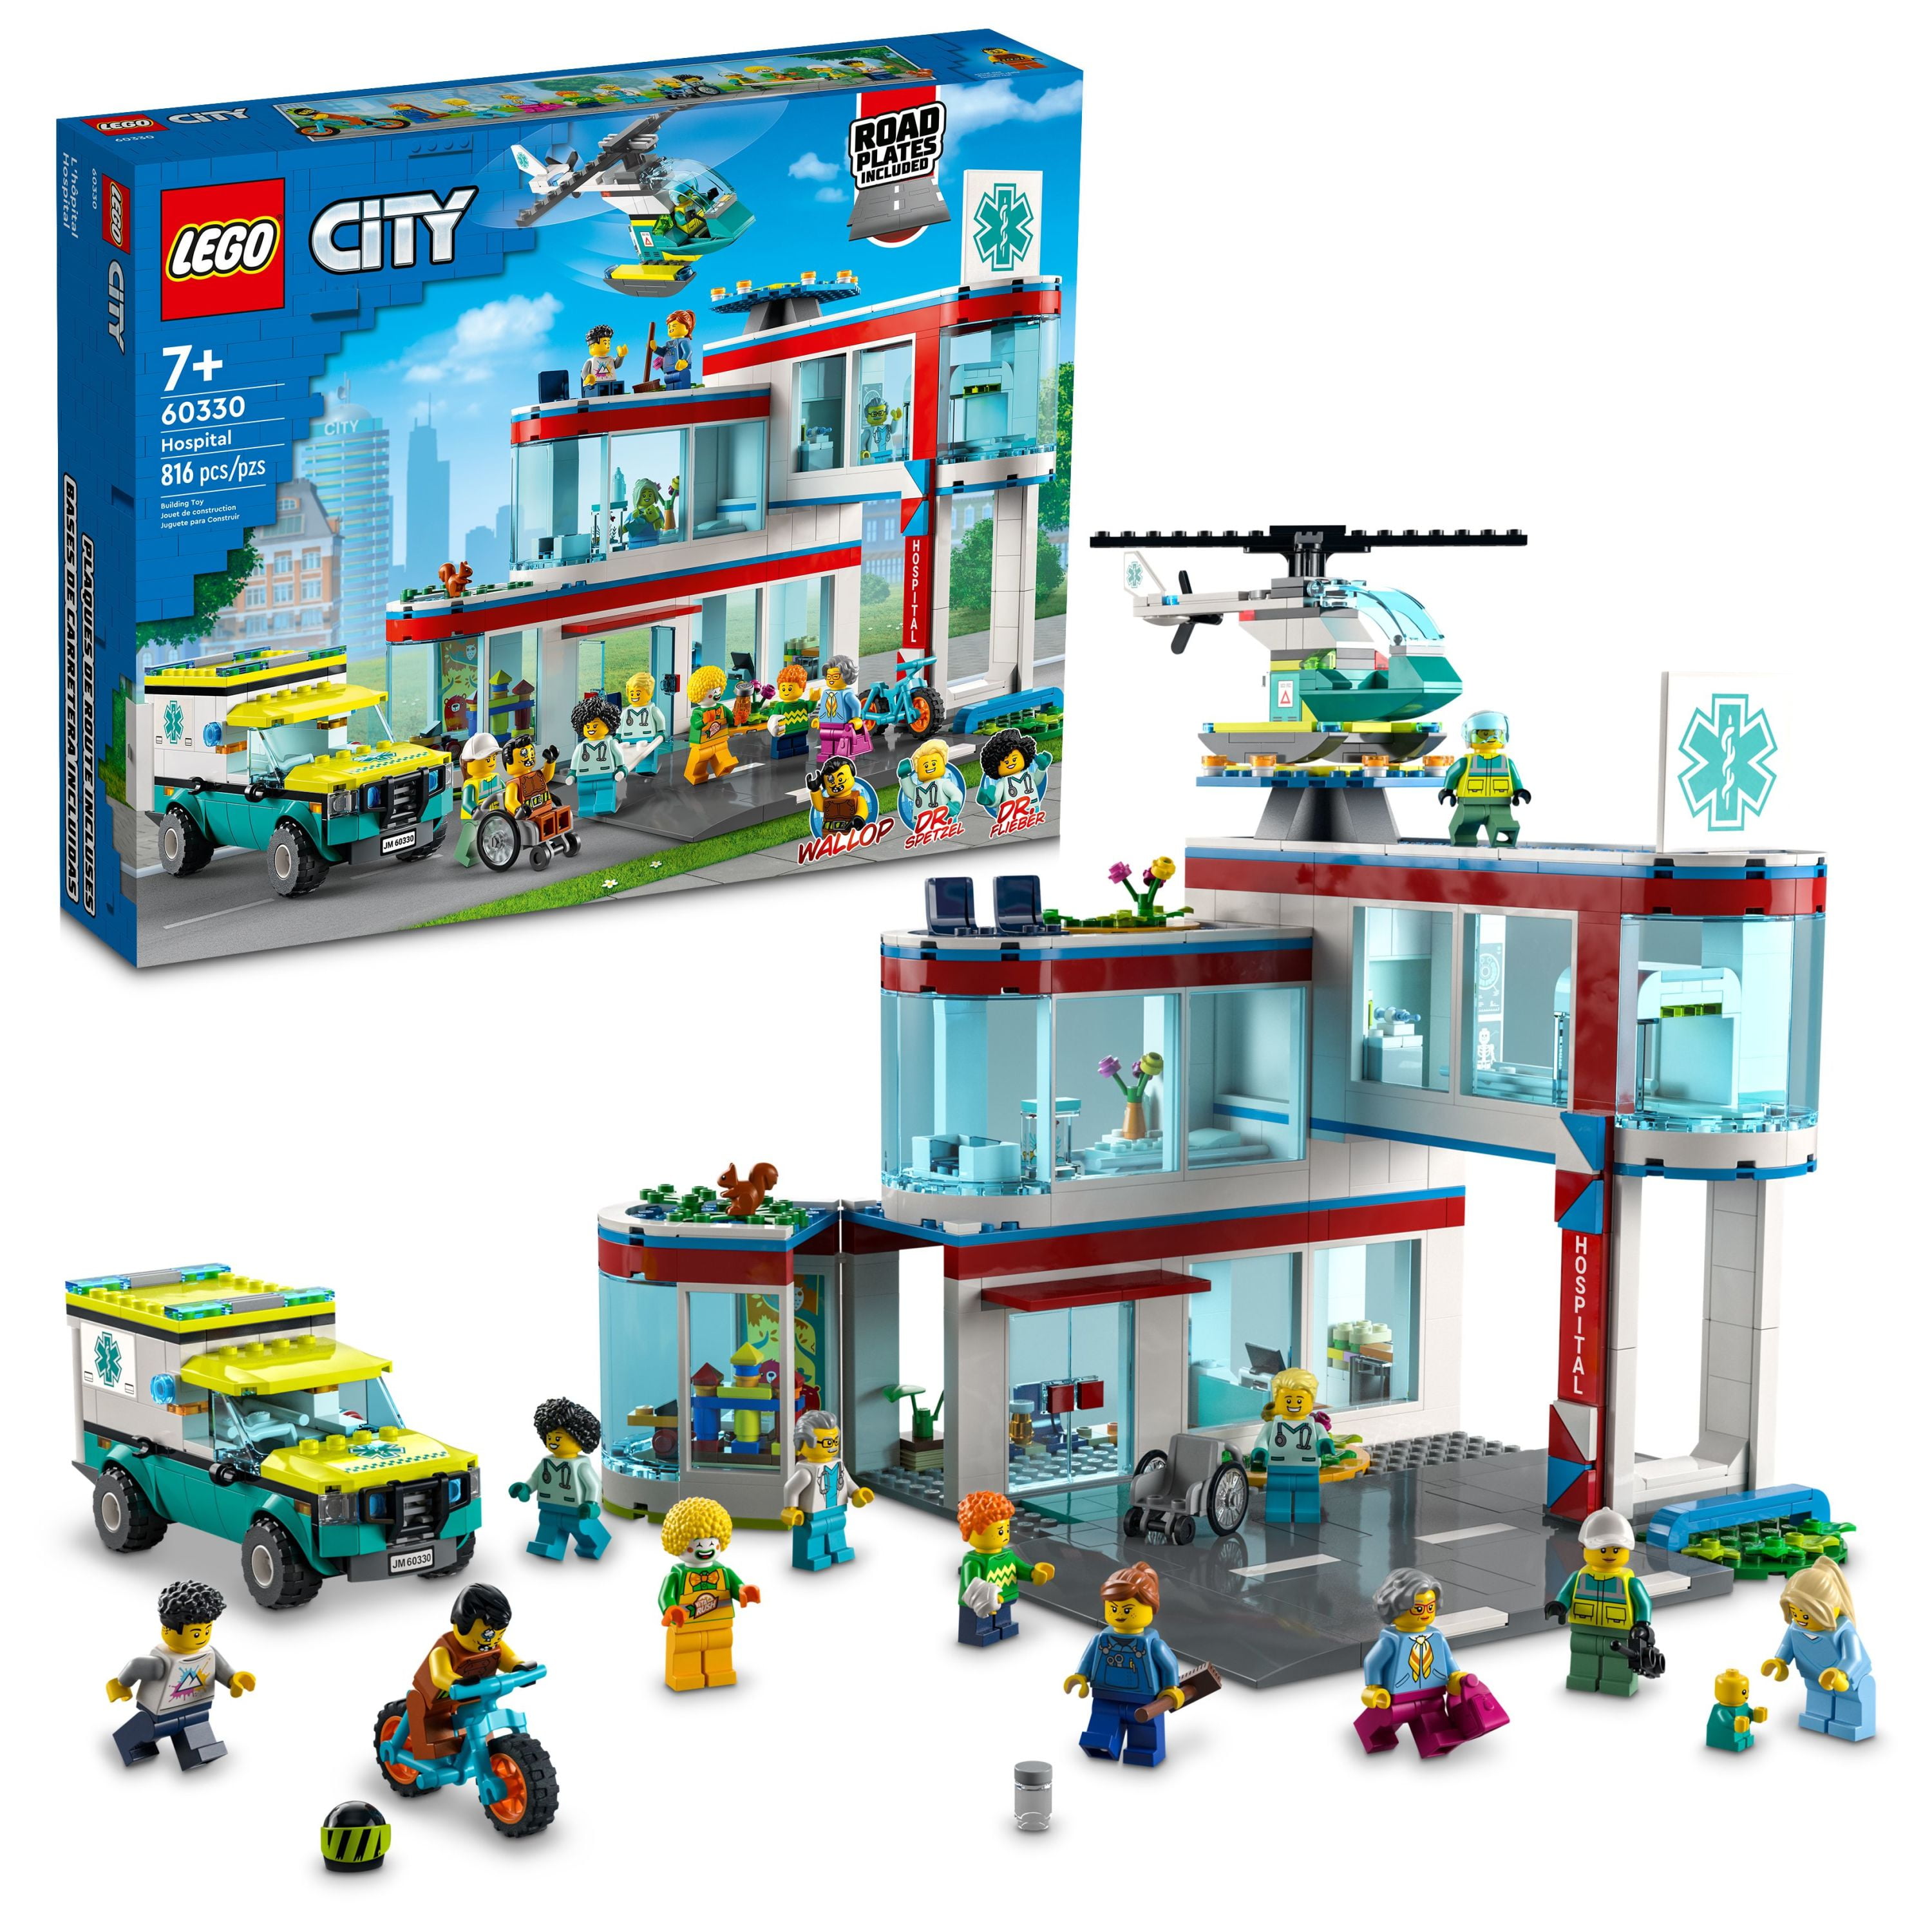 LEGO City Hospital Building Set 60330 with Ambulance, Rescue Helicopter and 12 Mini Figures, Pretend Play Toy Hospital for Fun, Connect to Other LEGO City Sets, for Kids Age 7+ - Walmart.com